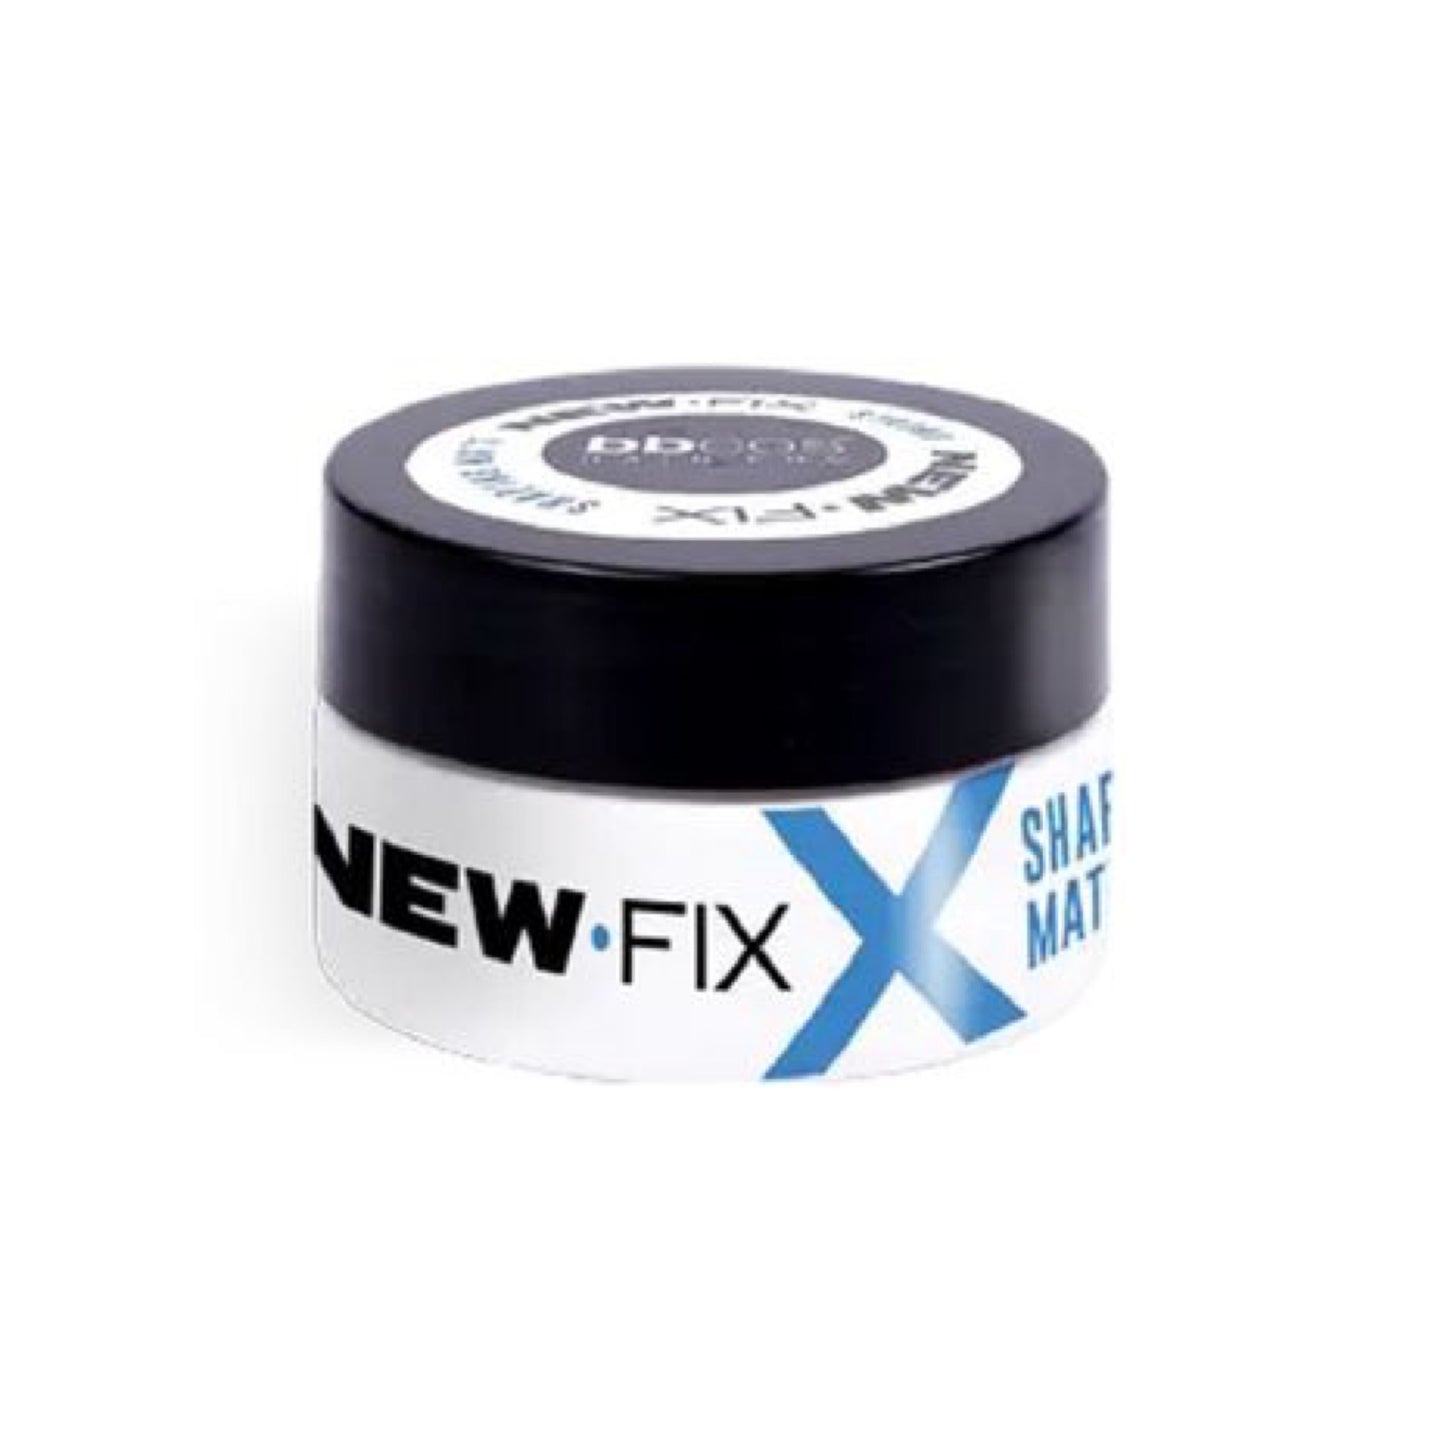 MHP - BBCOS New Fix Shaping Matte Modelling Paste (75ml)